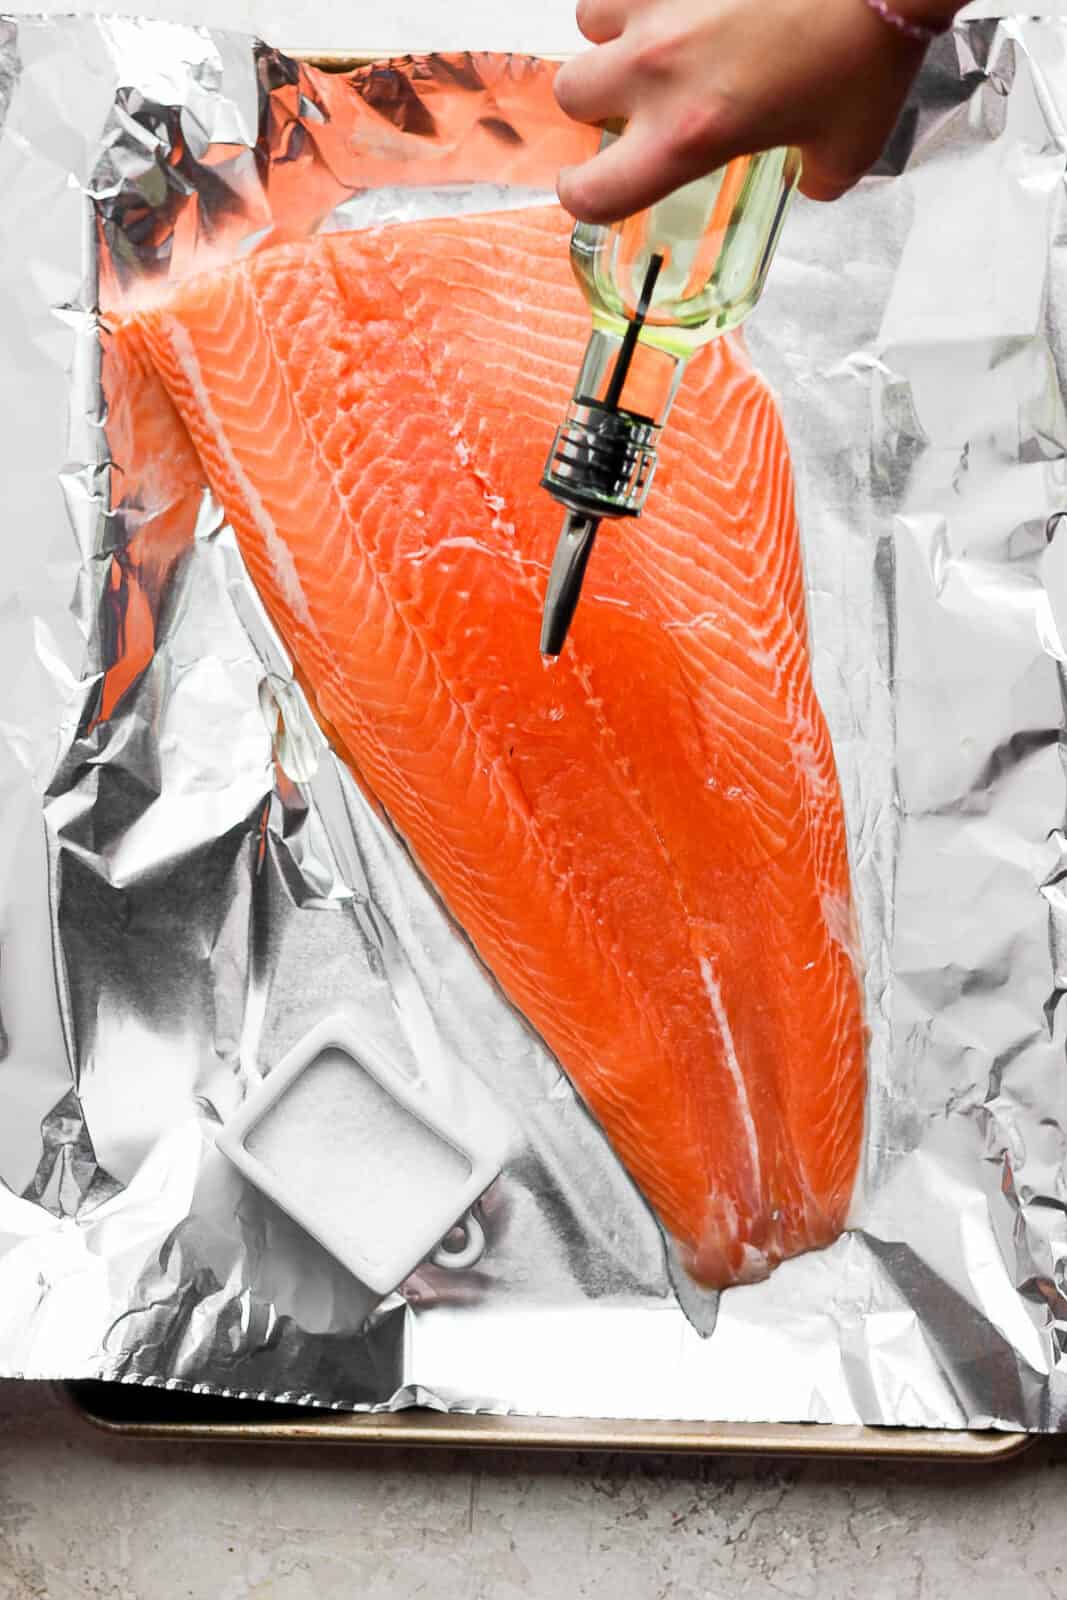 A large salmon fillet on a piece of aluminum foil with olive oil being drizzled on top.